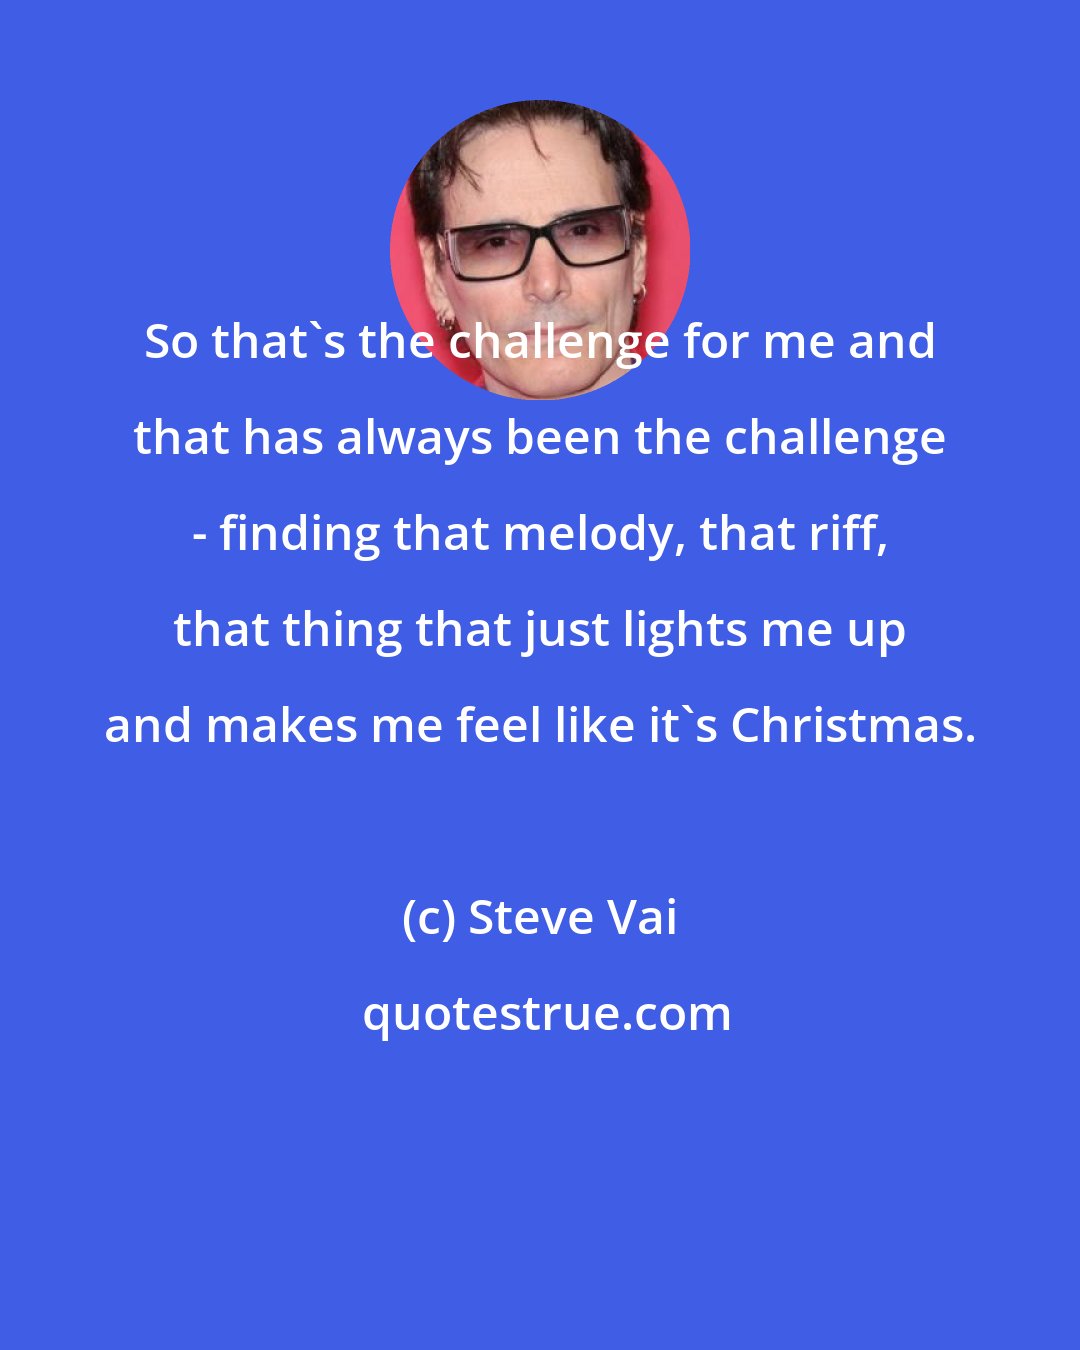 Steve Vai: So that's the challenge for me and that has always been the challenge - finding that melody, that riff, that thing that just lights me up and makes me feel like it's Christmas.